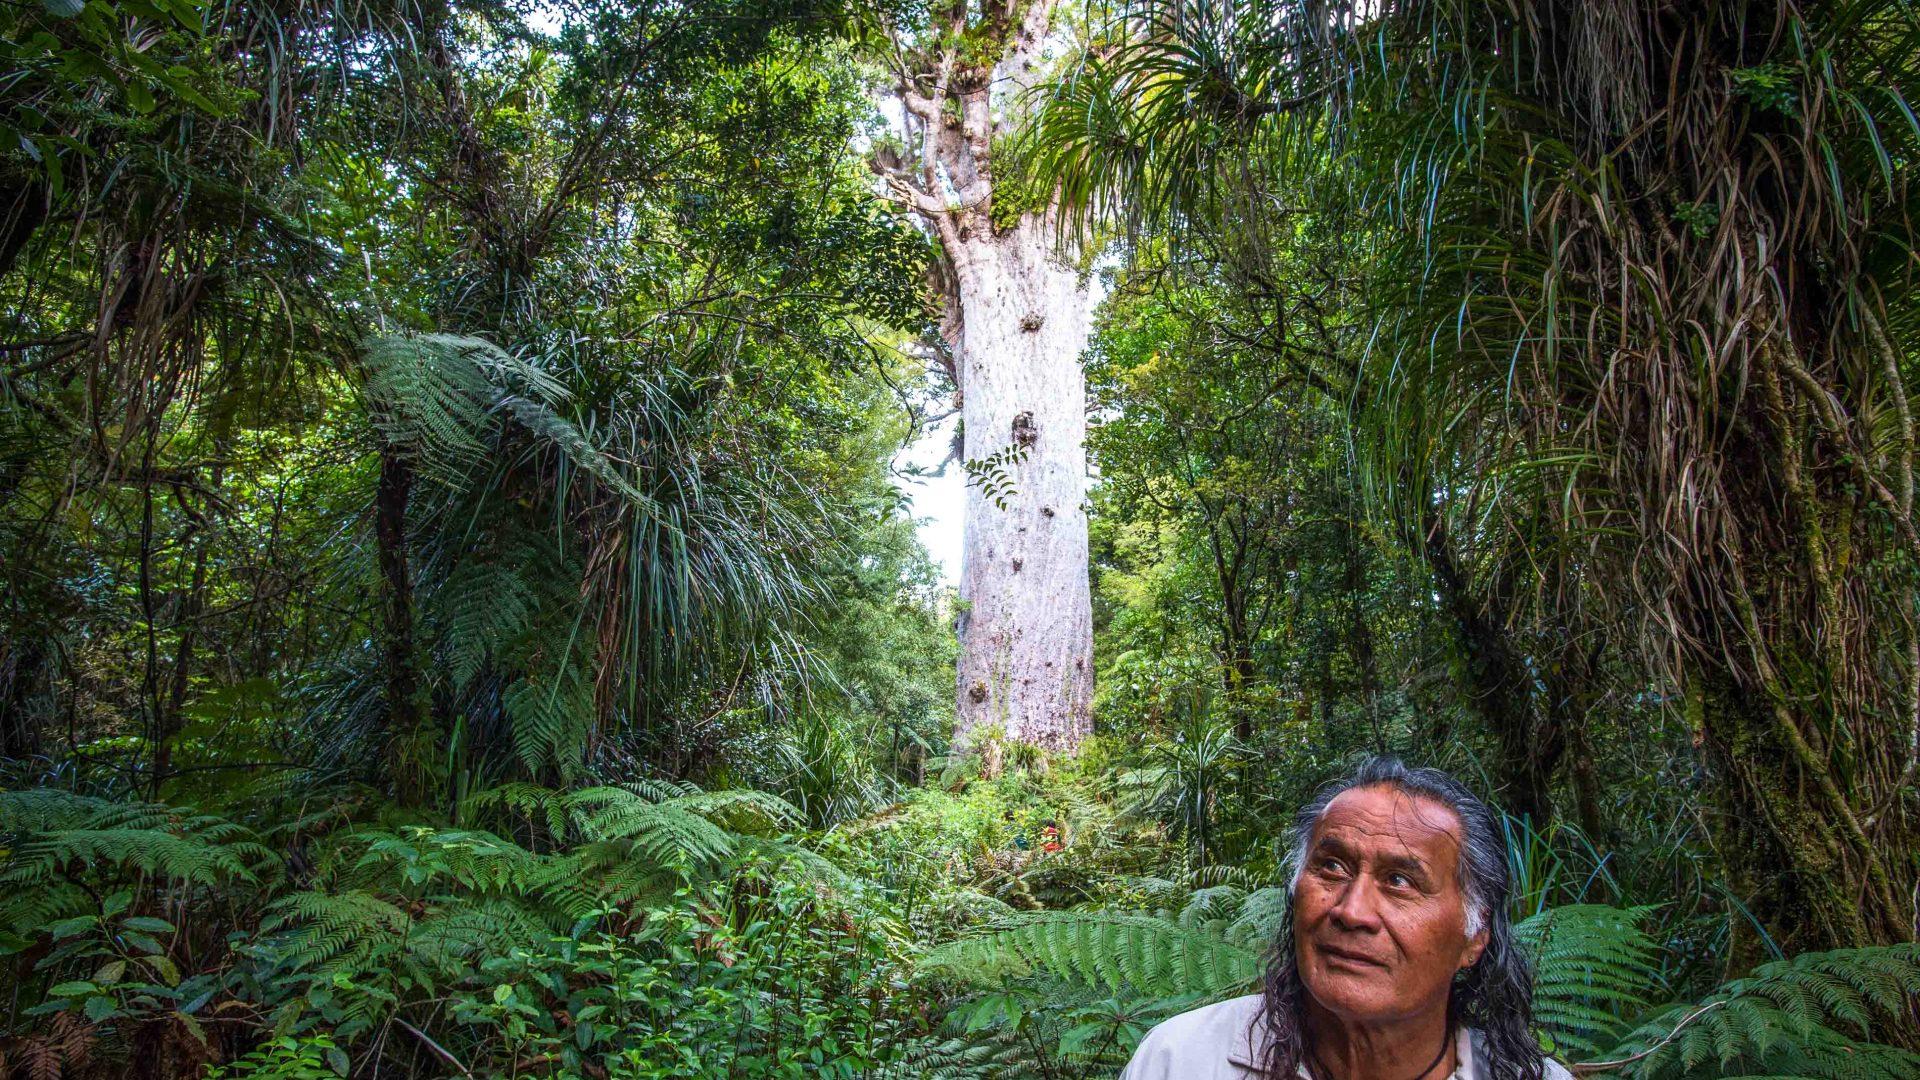 Adventures 2018: A Maori guide treks through the Waipoua Forest, home to Tana Mahuta, the largest living tree in New Zealand.